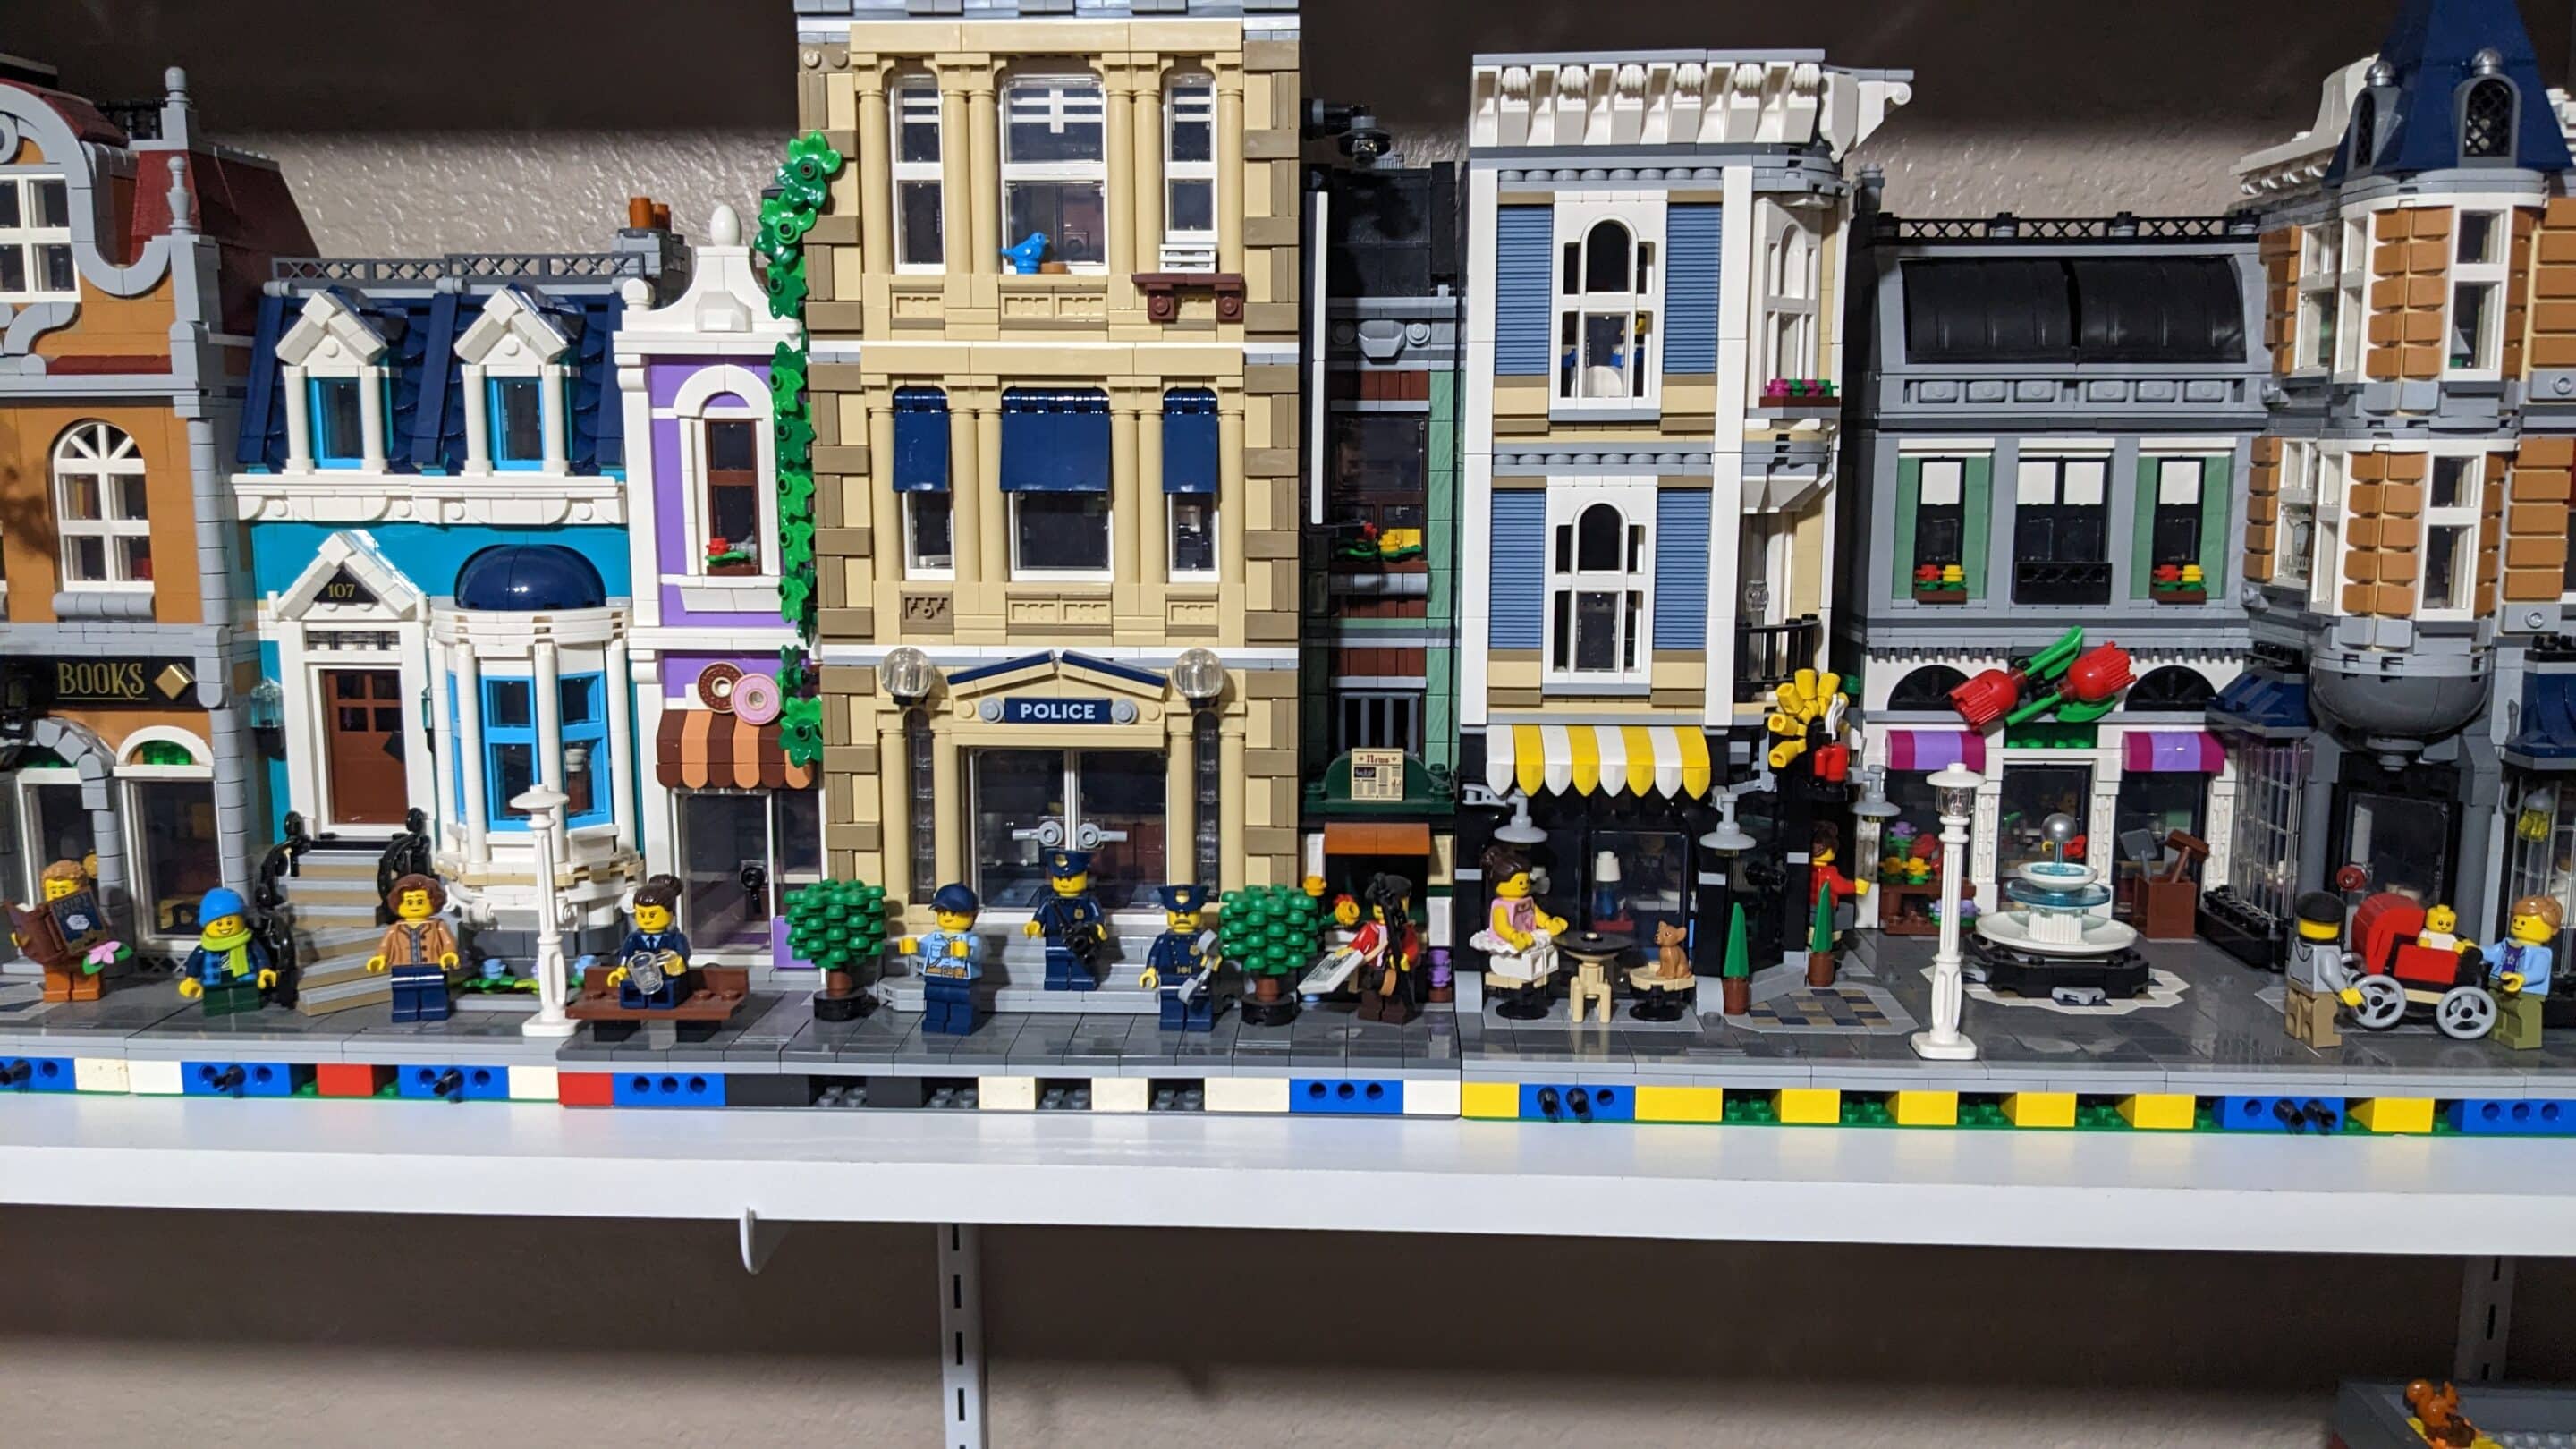 Several Lego sets built together as a city. This is just a part of Mike's Lego collection in the home of the Gallivanting Souls.